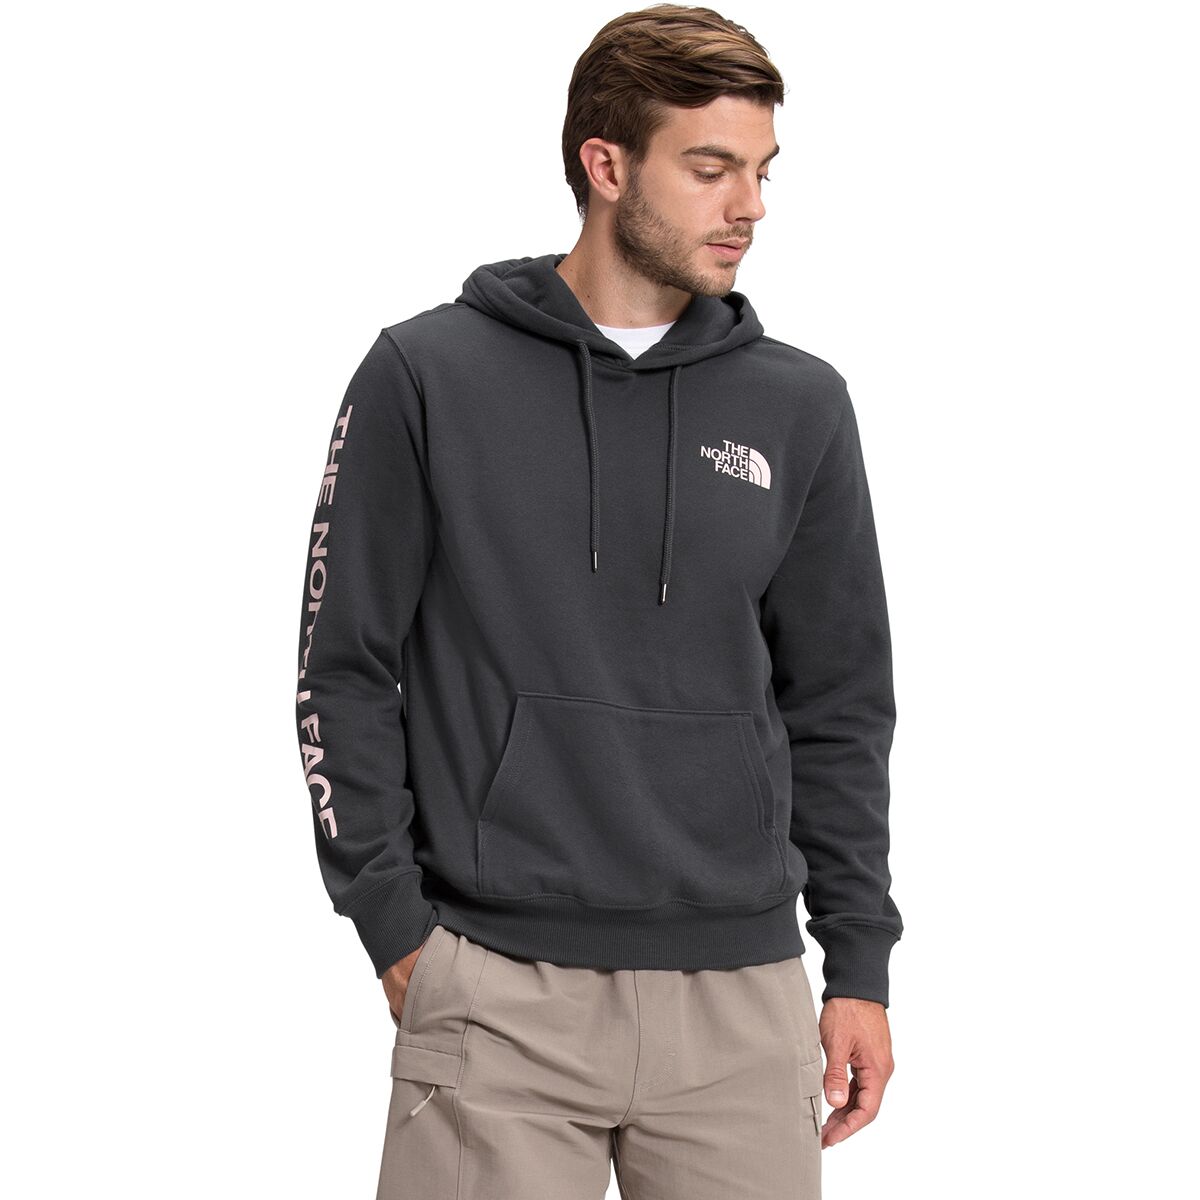 The North Face New Sleeve Hit Hoodie - Men's - Clothing